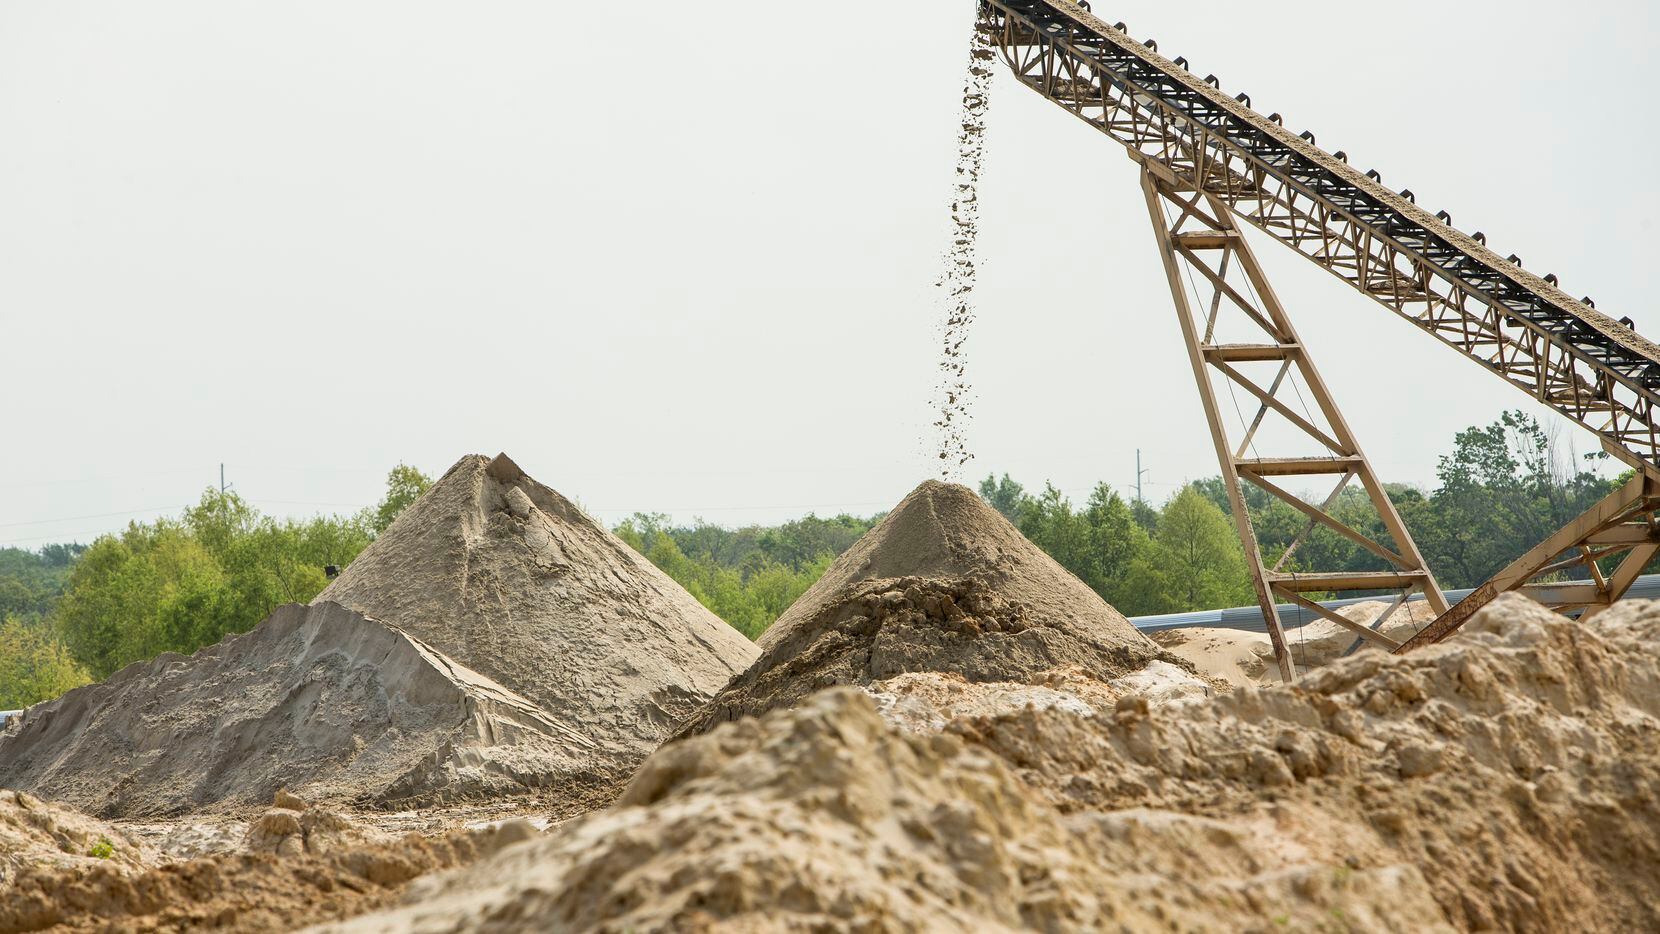 Silica sand is commonly used in the fracking process.